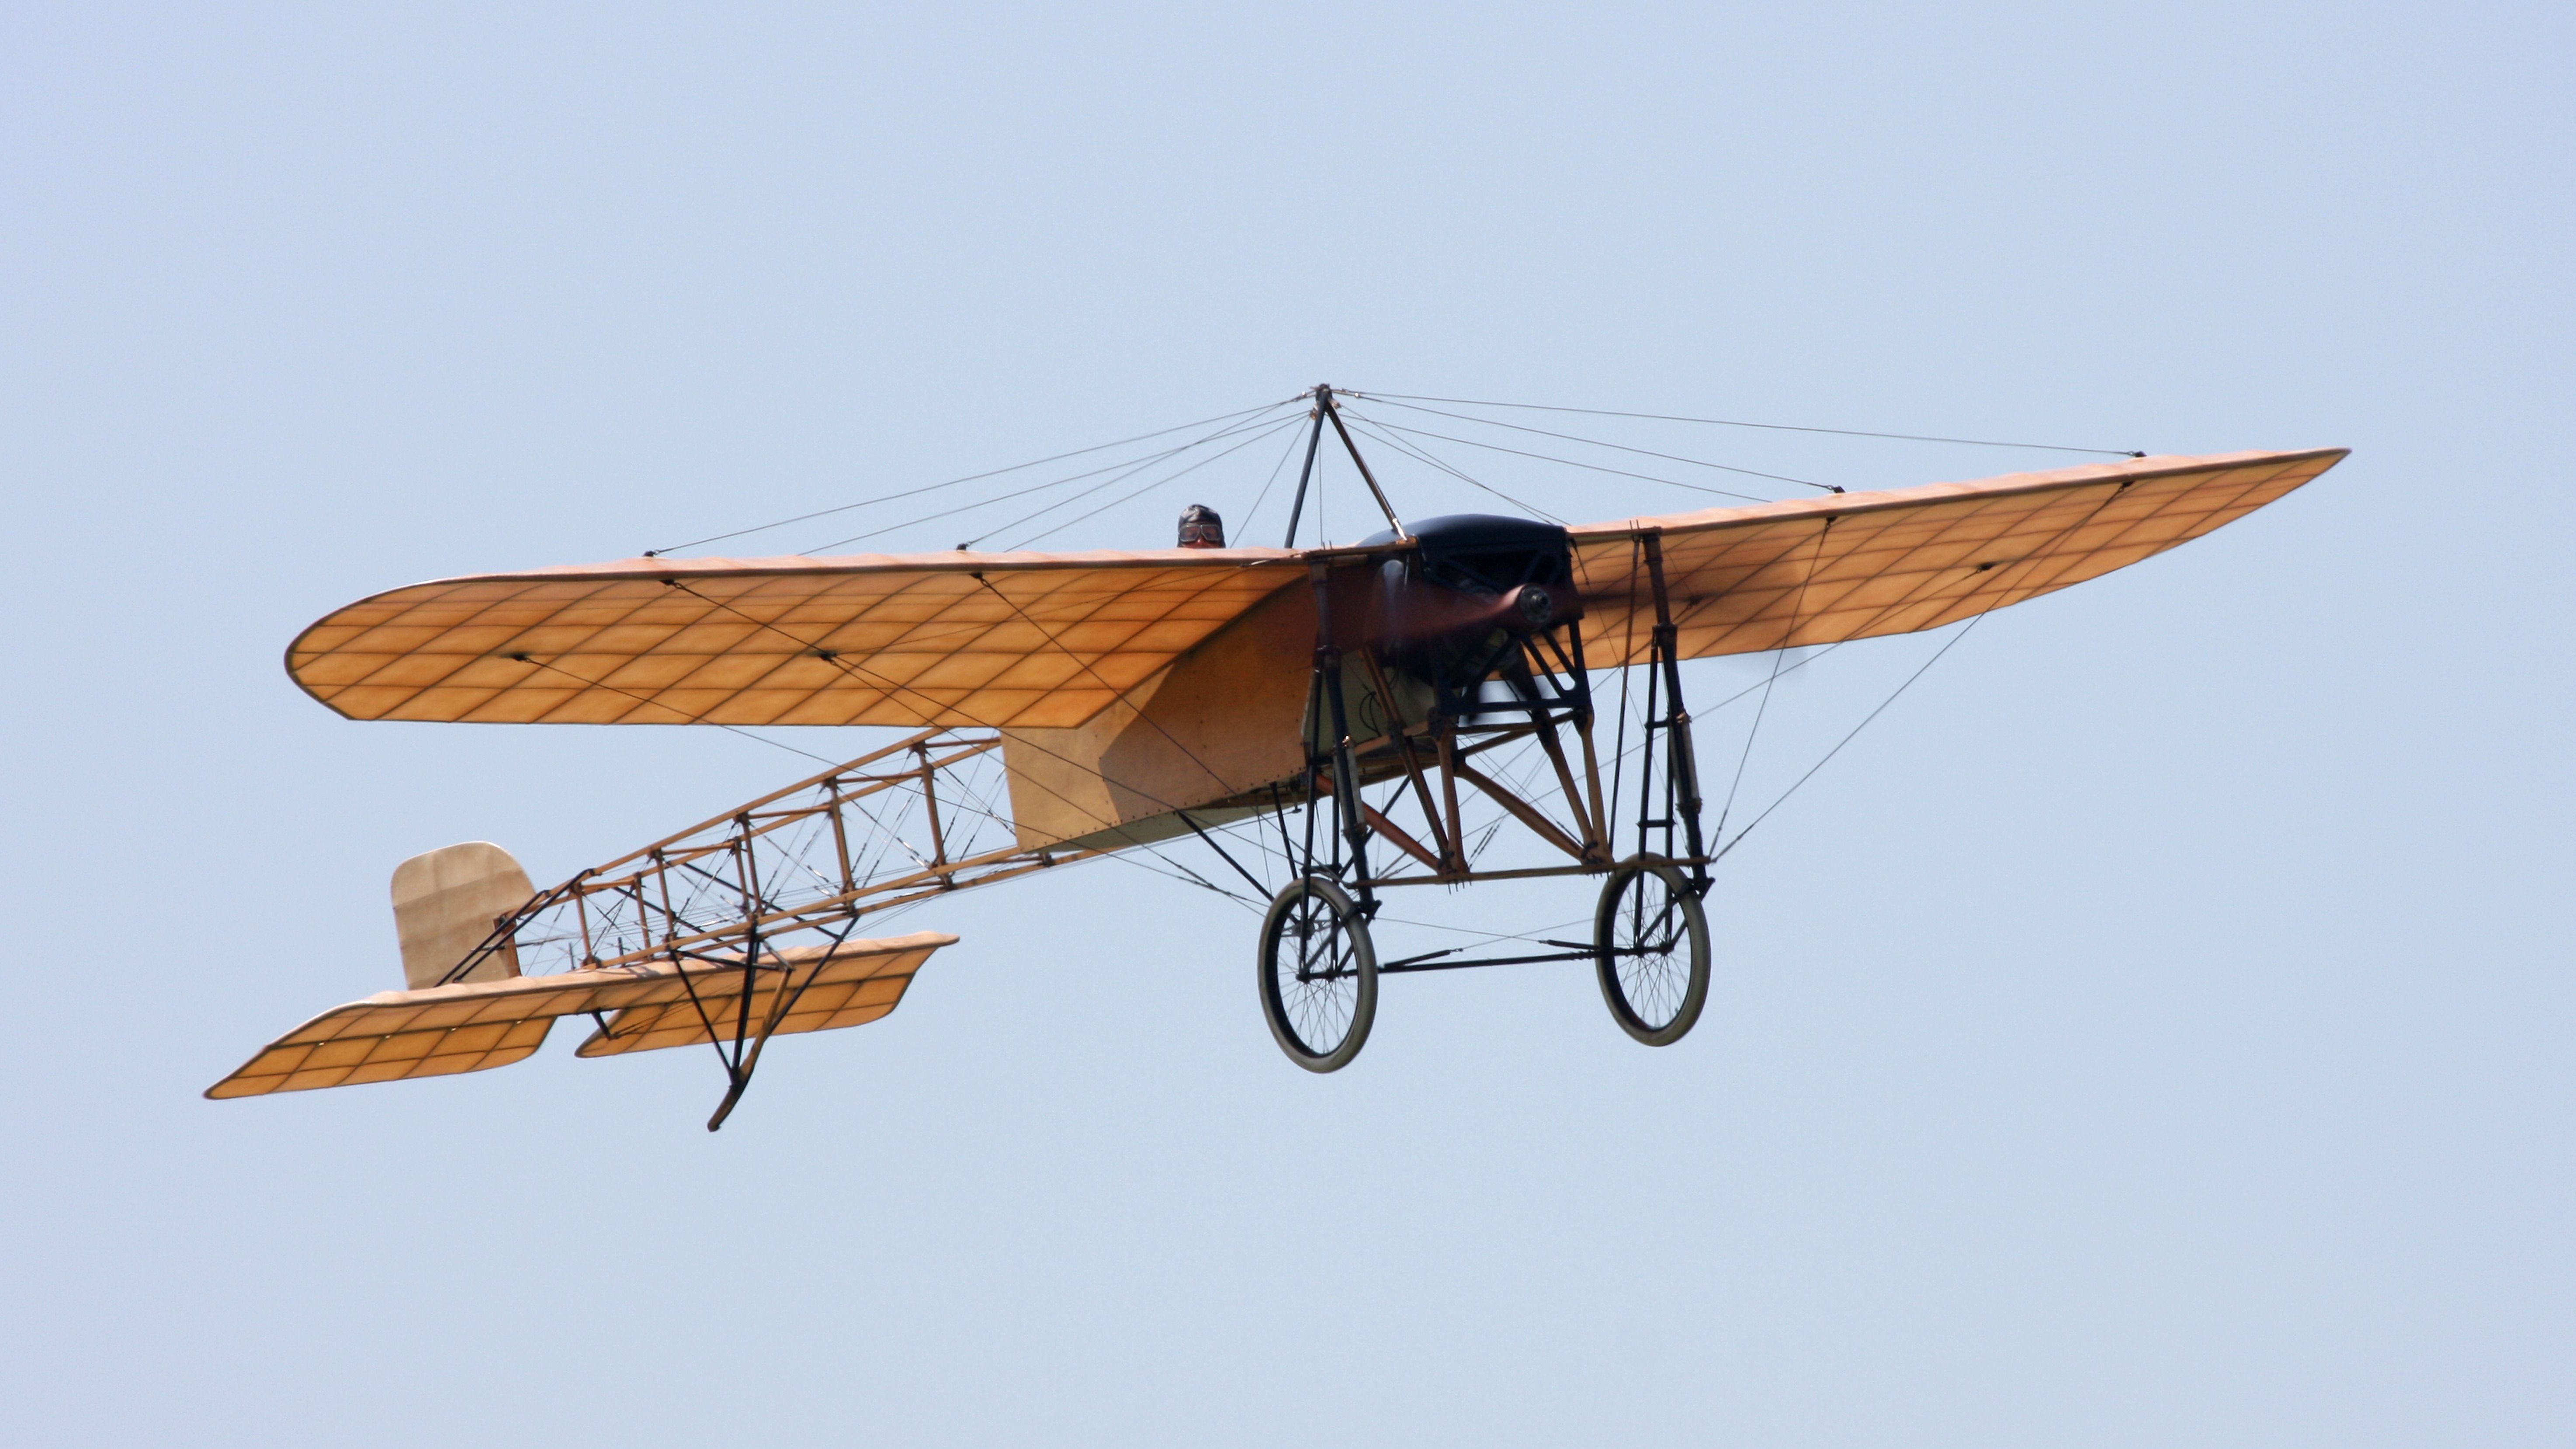 A Bleriot XI flying in the sky.